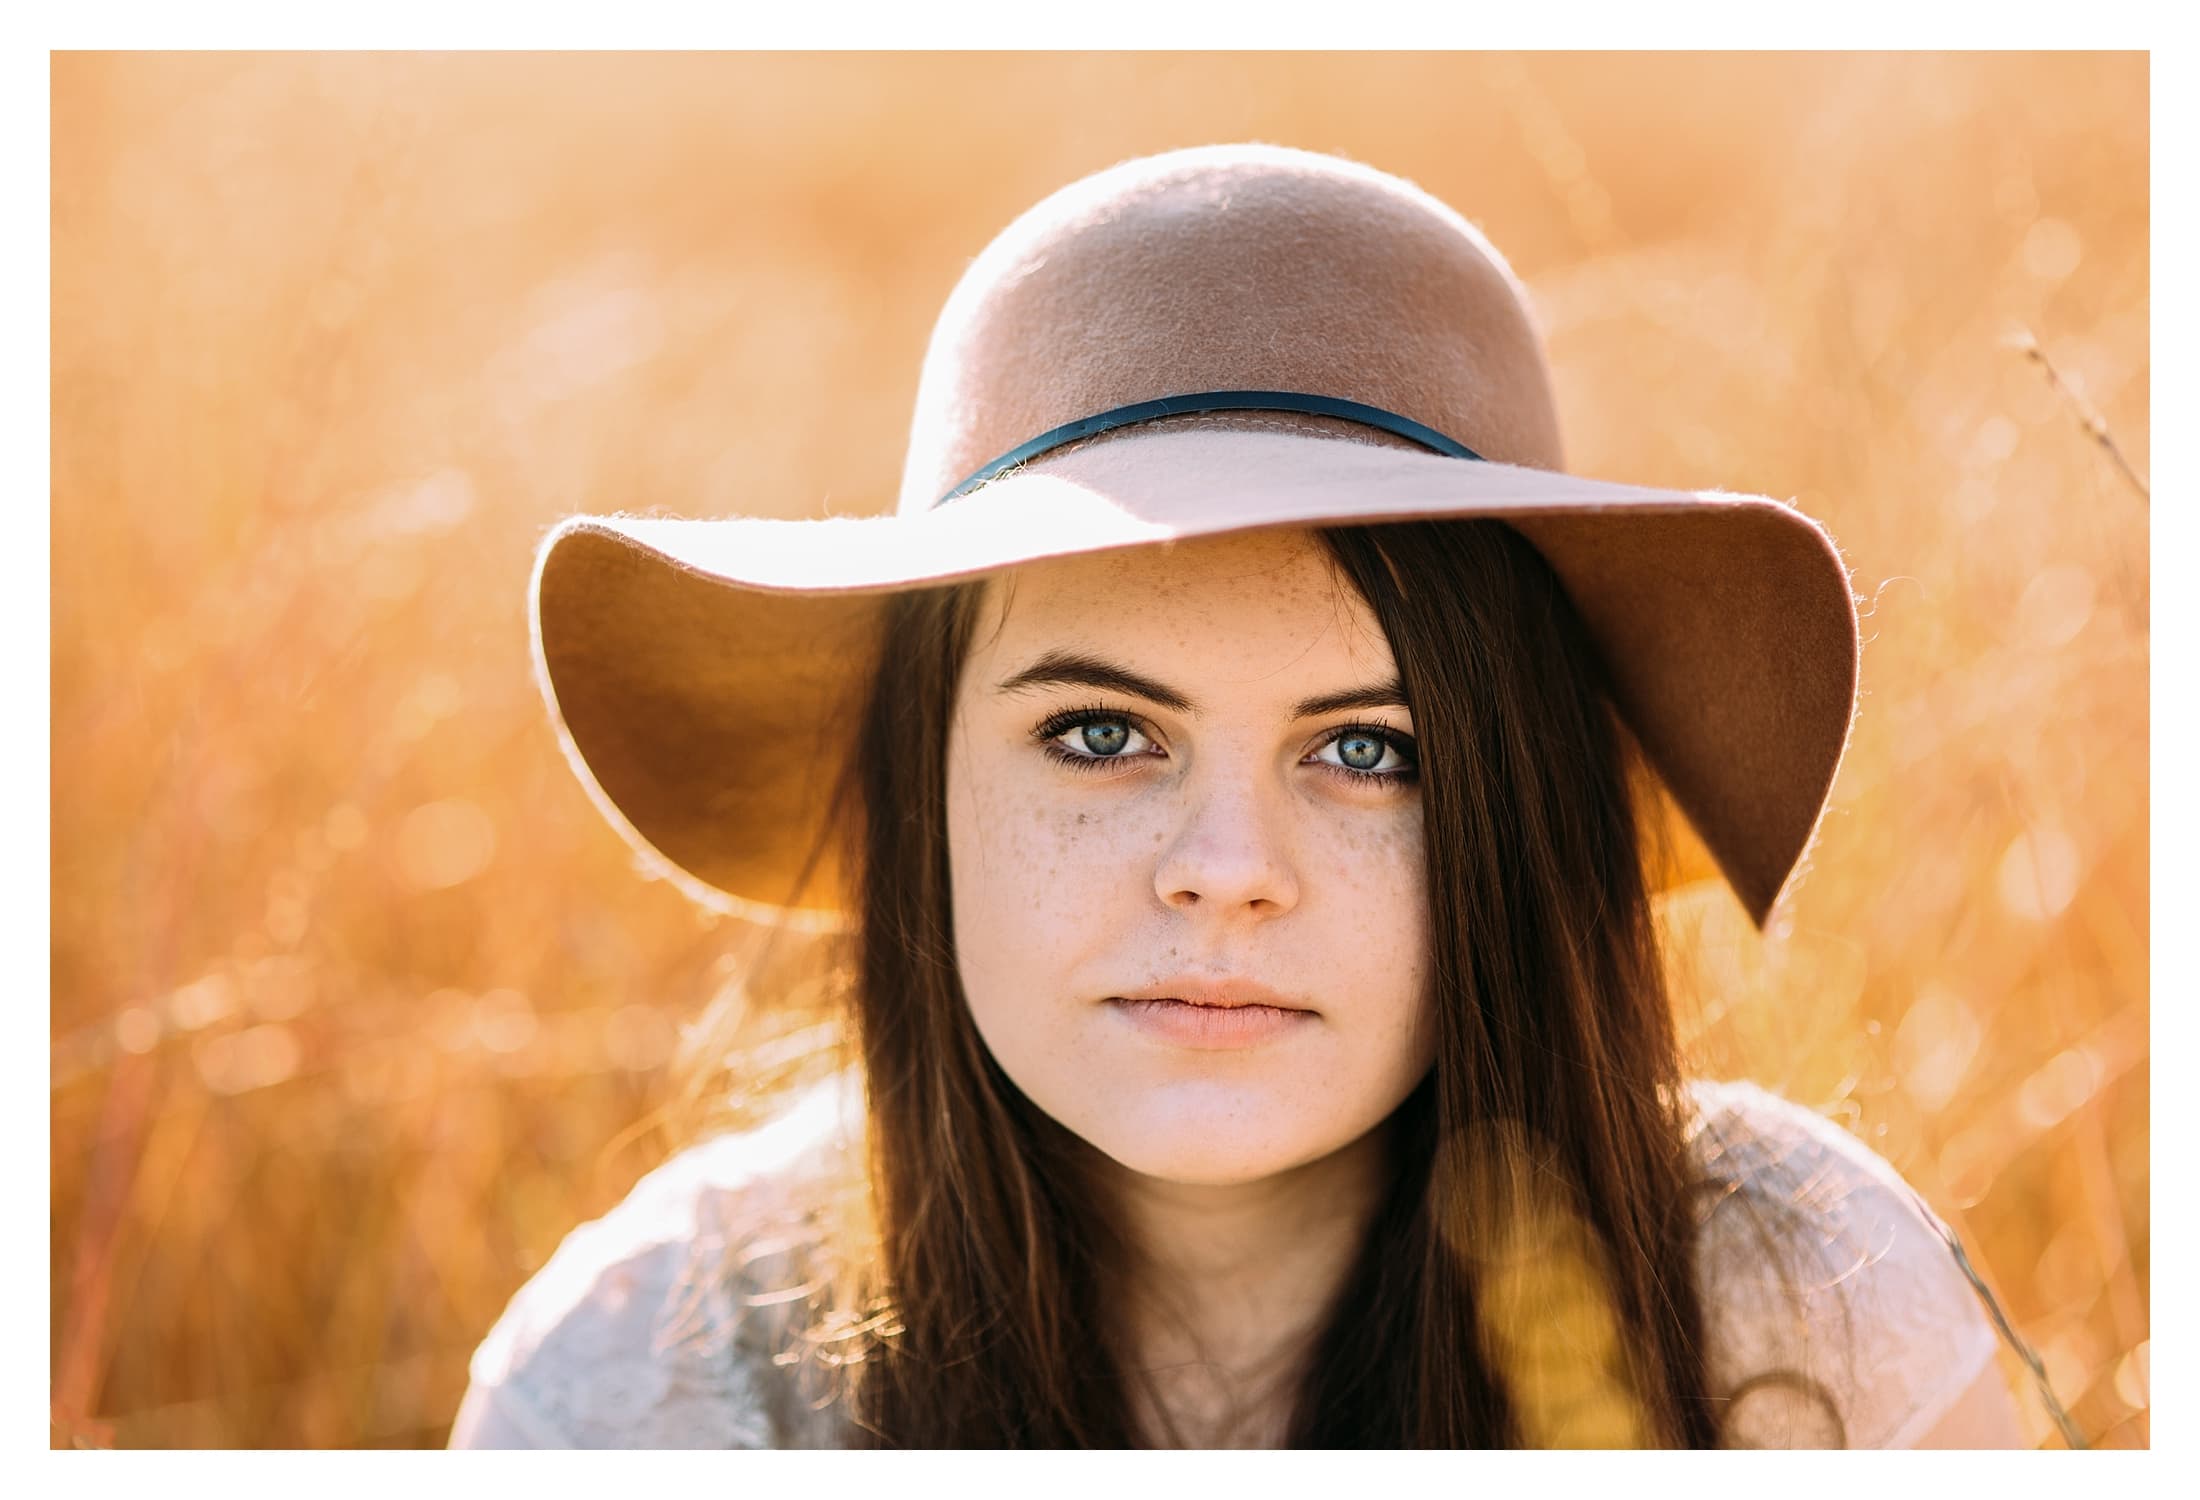 Teenage daughter sitting in field with a brown floppy hat.